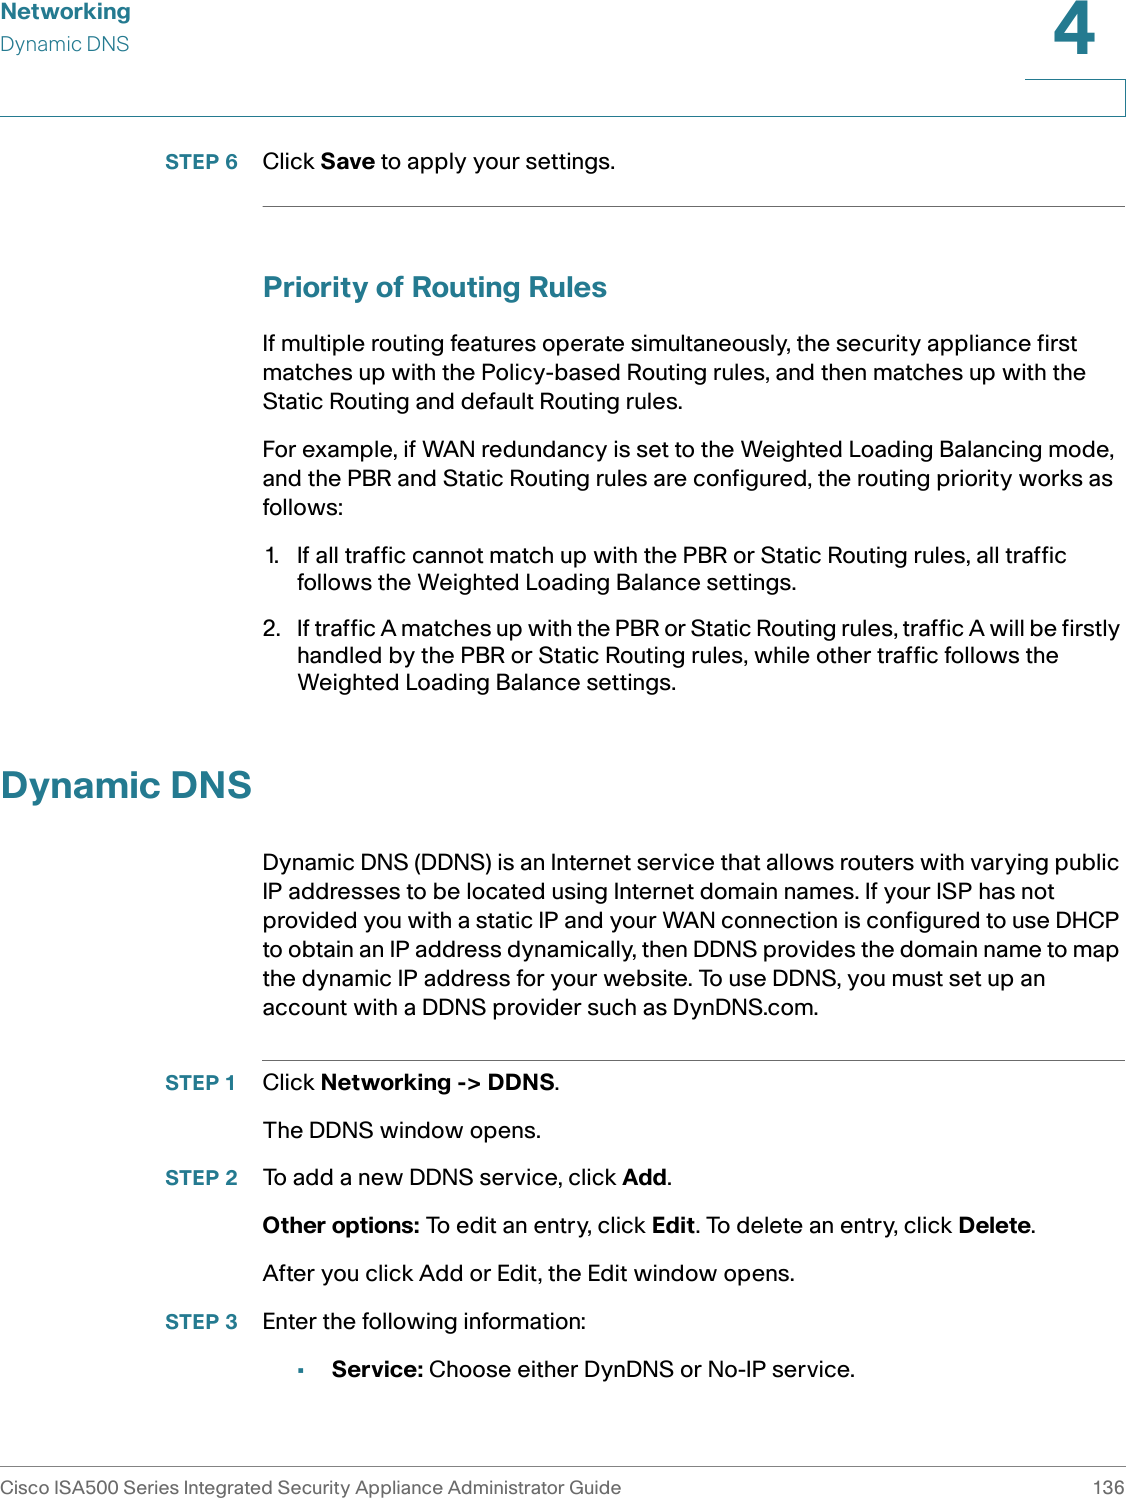 NetworkingDynamic DNSCisco ISA500 Series Integrated Security Appliance Administrator Guide 1364 STEP 6 Click Save to apply your settings.Priority of Routing RulesIf multiple routing features operate simultaneously, the security appliance first matches up with the Policy-based Routing rules, and then matches up with the Static Routing and default Routing rules.For example, if WAN redundancy is set to the Weighted Loading Balancing mode, and the PBR and Static Routing rules are configured, the routing priority works as follows:1. If all traffic cannot match up with the PBR or Static Routing rules, all traffic follows the Weighted Loading Balance settings. 2. If traffic A matches up with the PBR or Static Routing rules, traffic A will be firstly handled by the PBR or Static Routing rules, while other traffic follows the Weighted Loading Balance settings.Dynamic DNSDynamic DNS (DDNS) is an Internet service that allows routers with varying public IP addresses to be located using Internet domain names. If your ISP has not provided you with a static IP and your WAN connection is configured to use DHCP to obtain an IP address dynamically, then DDNS provides the domain name to map the dynamic IP address for your website. To use DDNS, you must set up an account with a DDNS provider such as DynDNS.com. STEP 1 Click Networking -&gt; DDNS.The DDNS window opens. STEP 2 To add a new DDNS service, click Add. Other options: To edit an entry, click Edit. To delete an entry, click Delete. After you click Add or Edit, the Edit window opens.STEP 3 Enter the following information:•Service: Choose either DynDNS or No-IP service. 